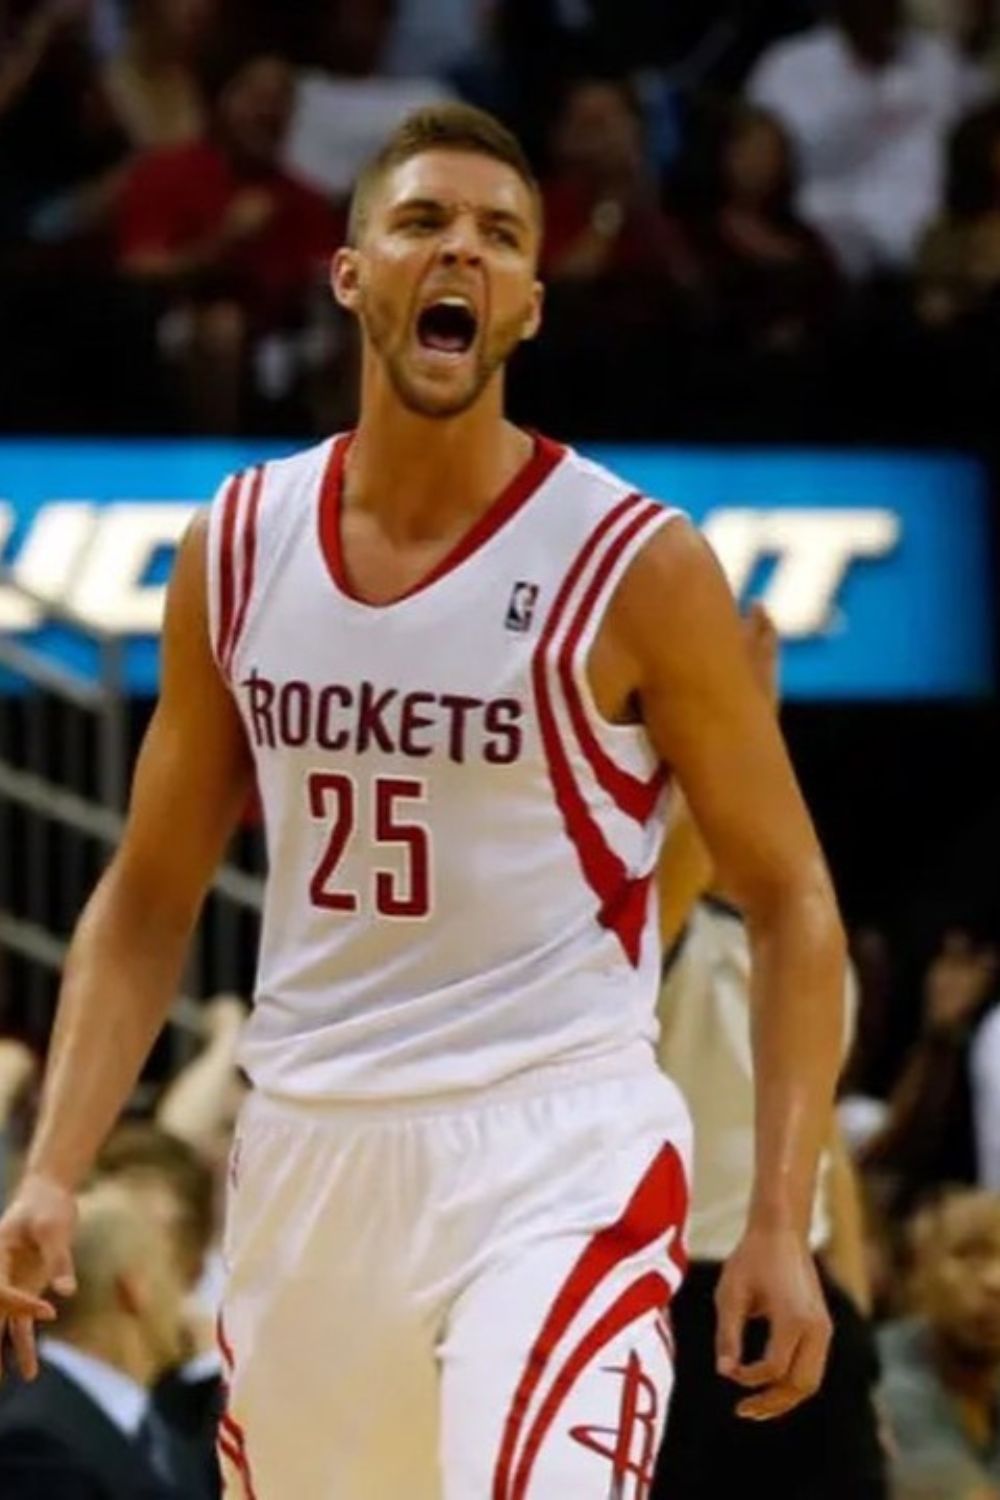 American Former Professional Basketball Player Chandler Parsons